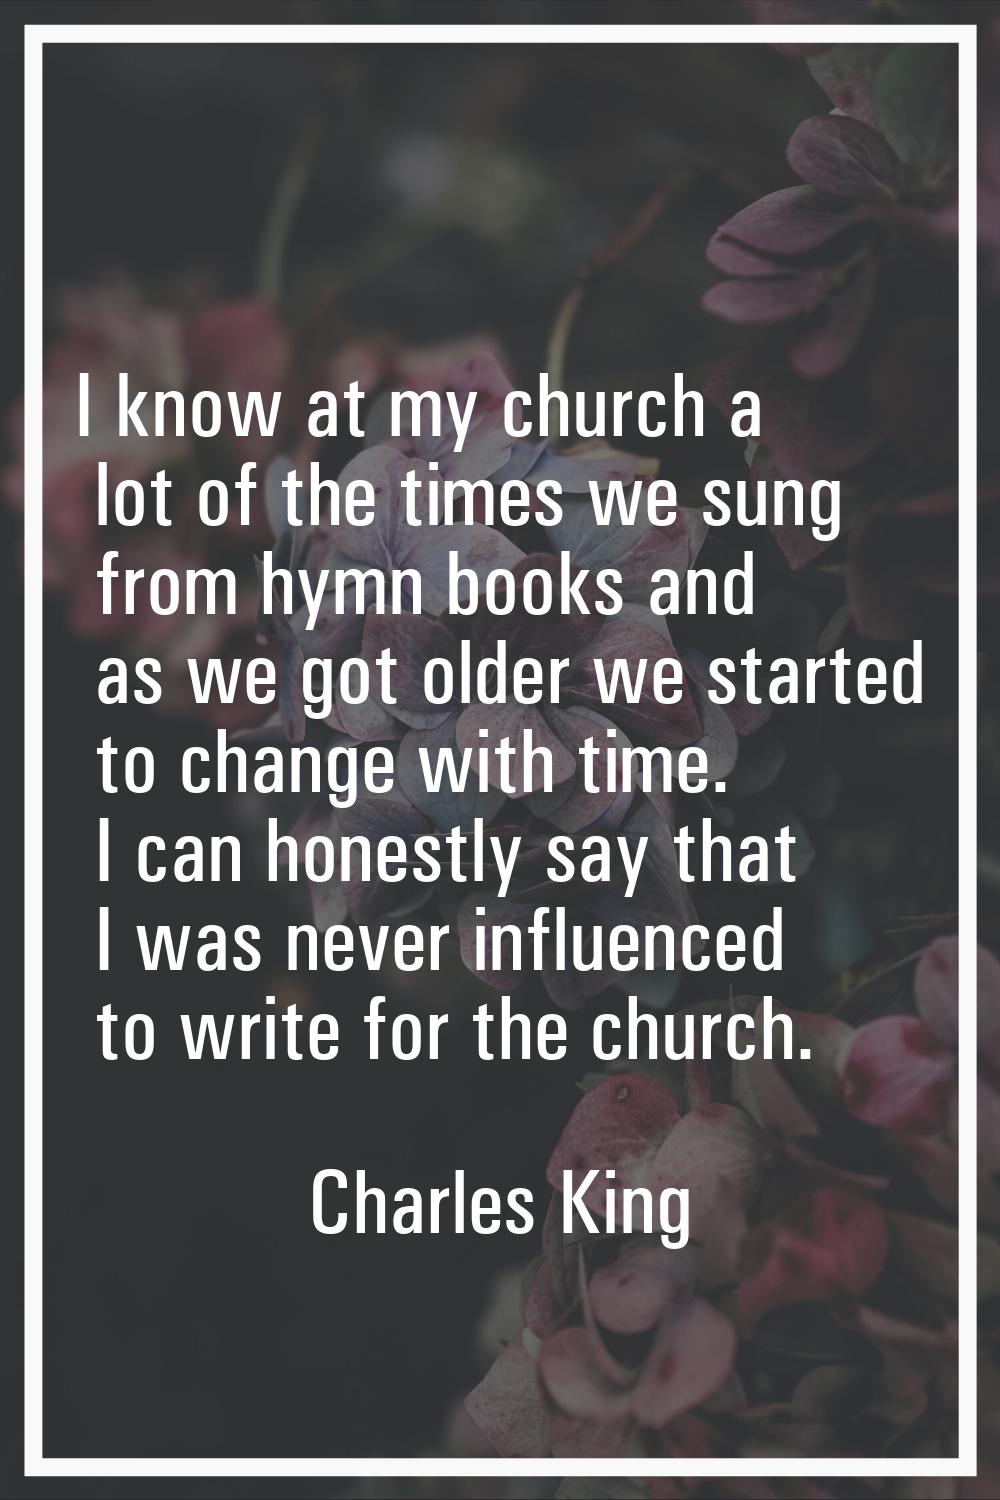 I know at my church a lot of the times we sung from hymn books and as we got older we started to ch